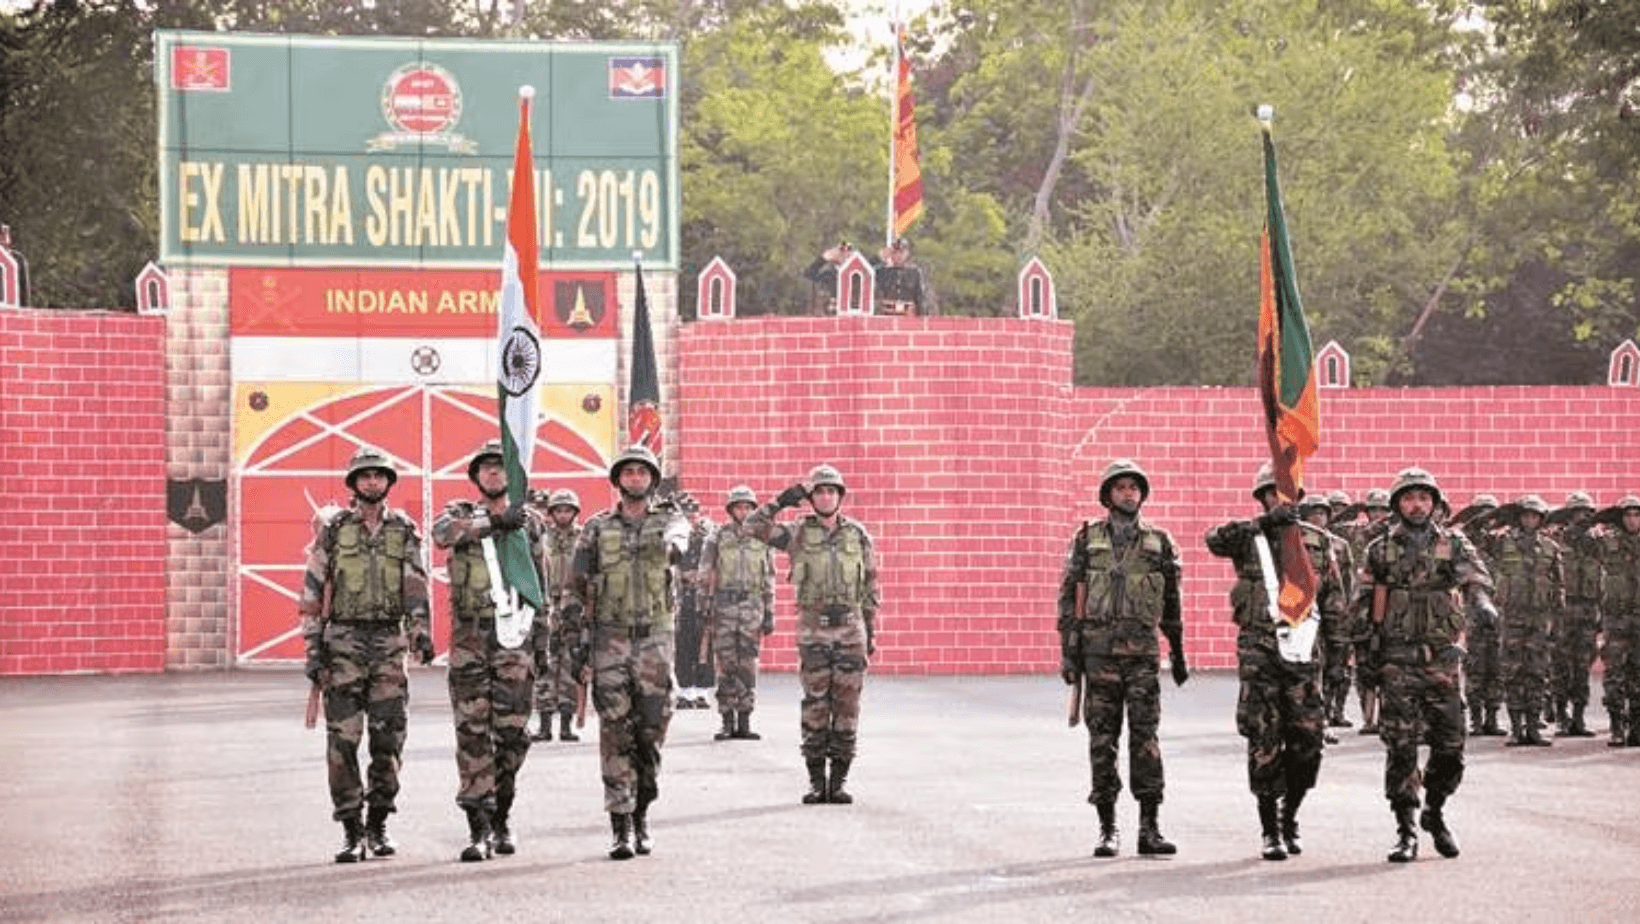 India-Sri Lanka Joint Military Exercise Culminates at Southern Command in Pune